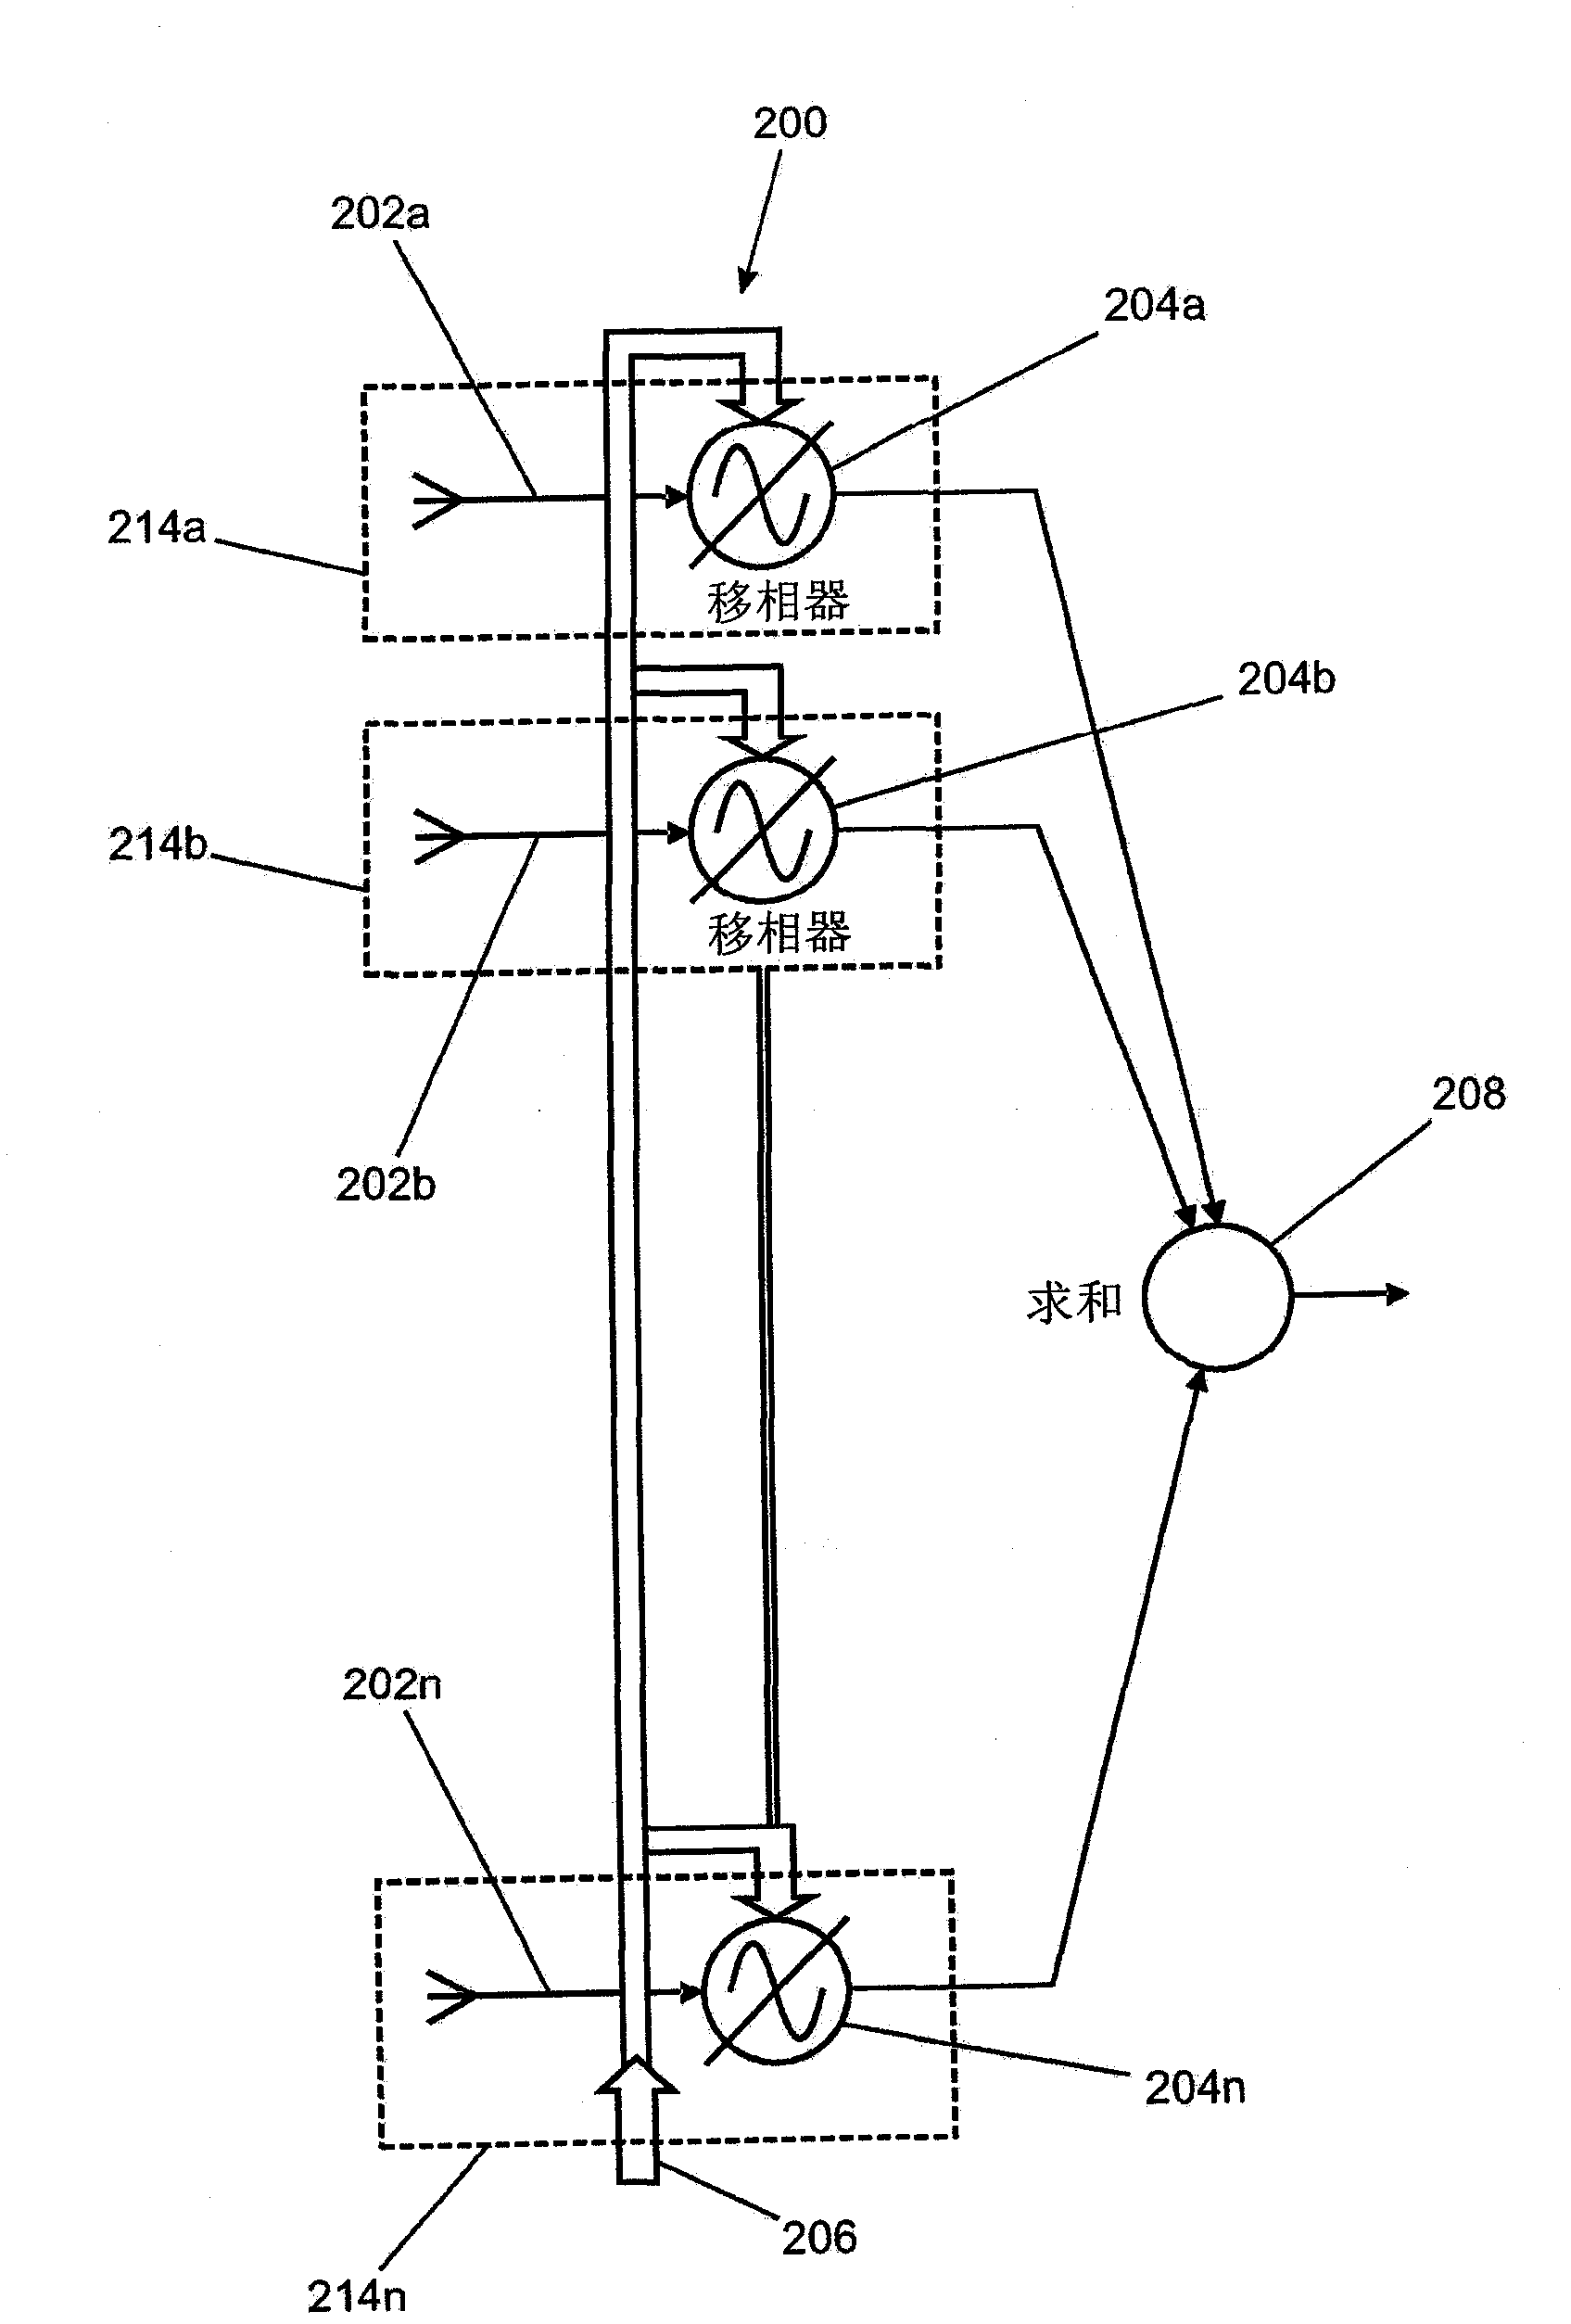 Phased array antenna and method of operating phased array antenna